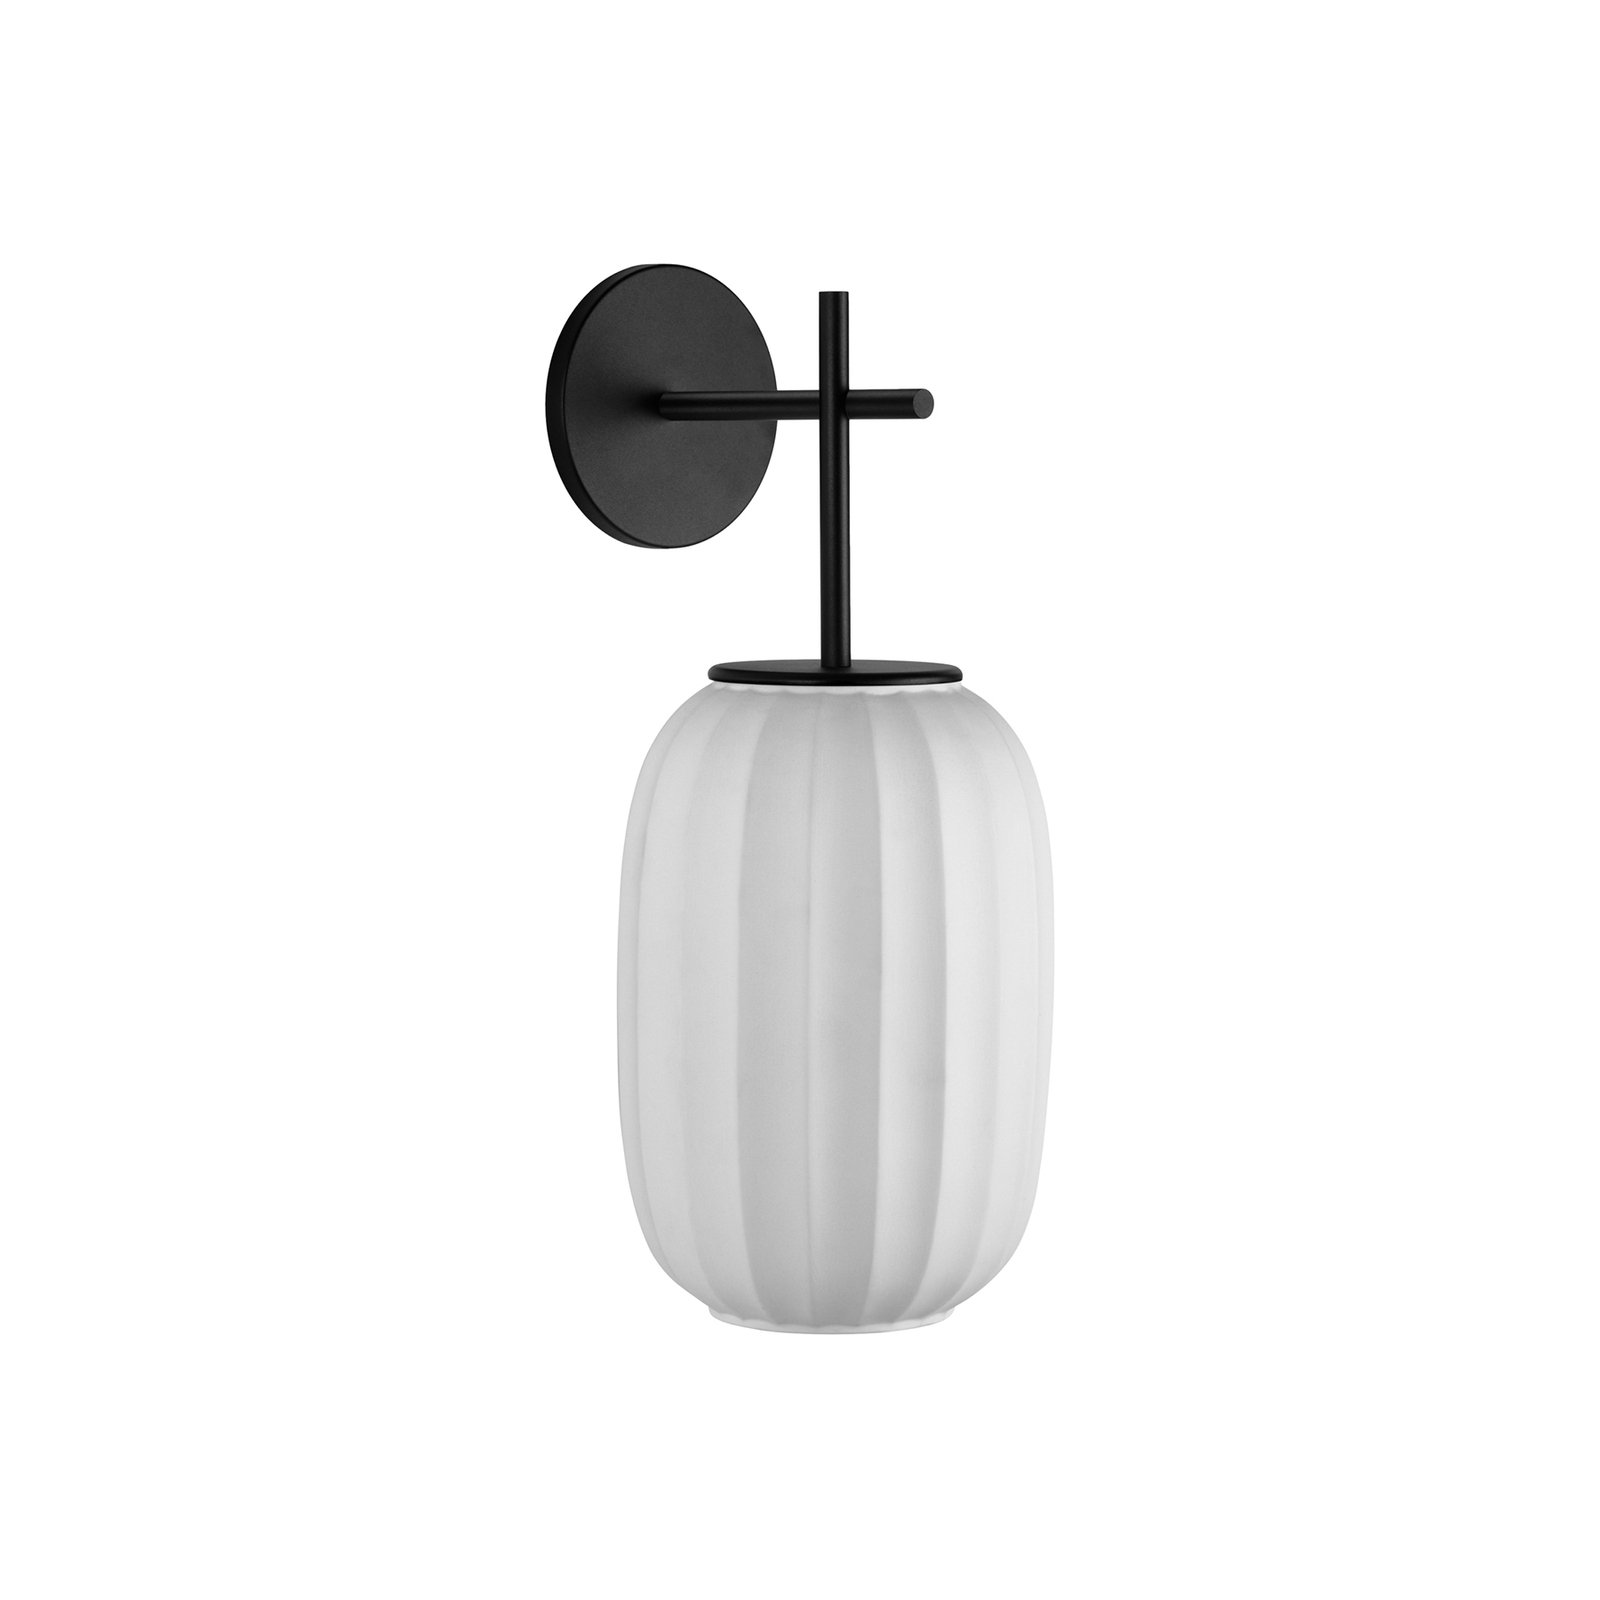 Mei wall light, vertical oval lampshade, black